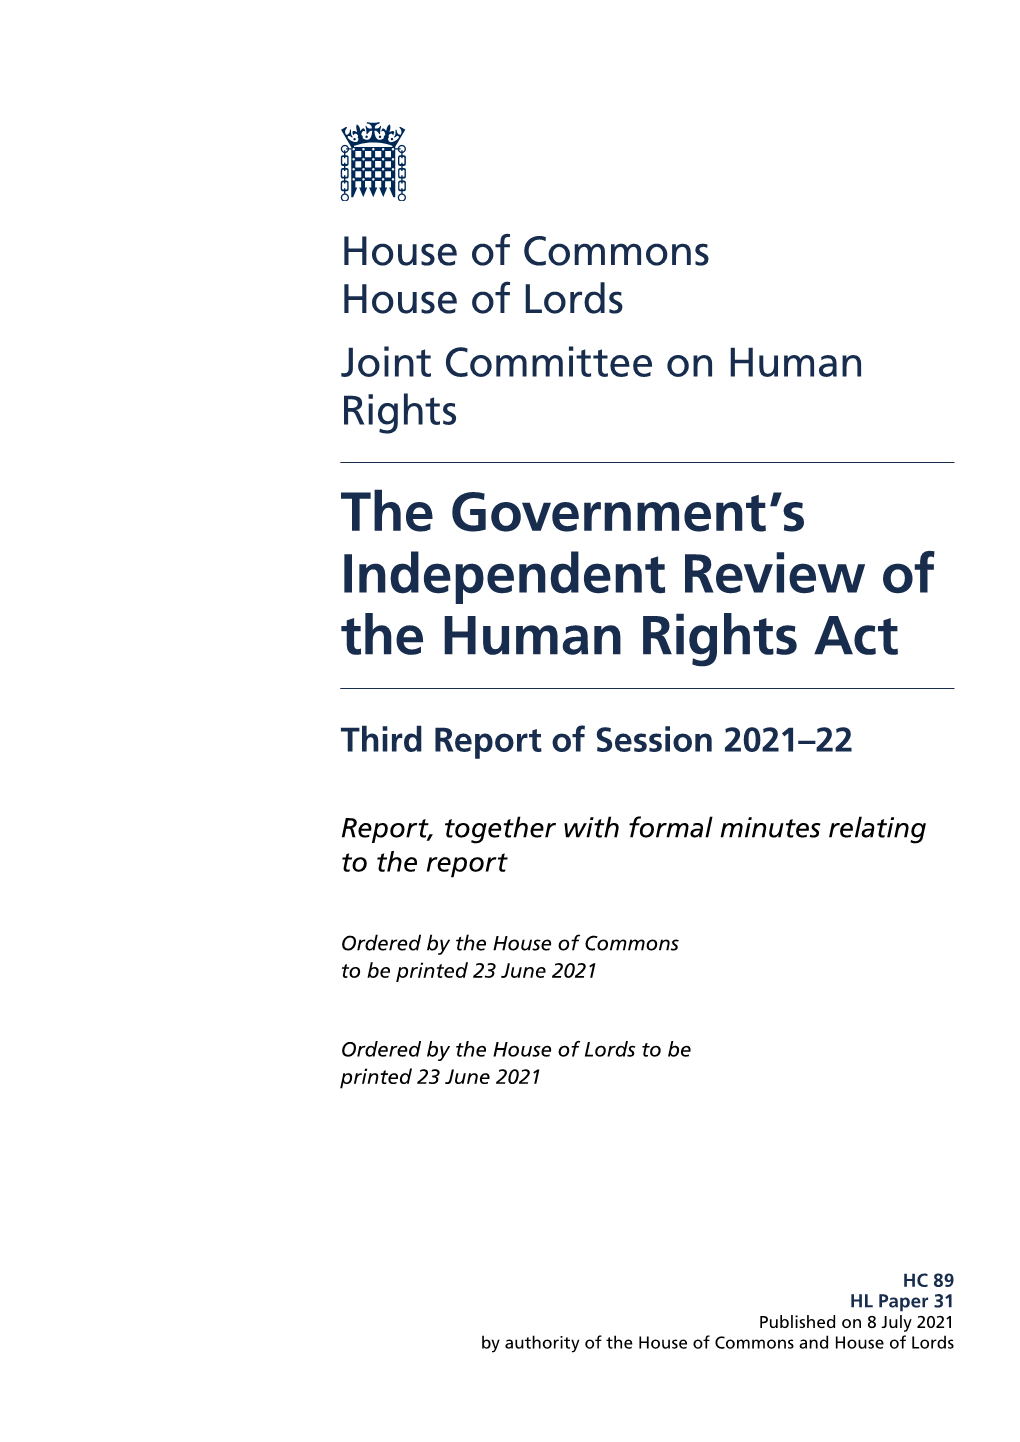 The Government's Independent Review of the Human Rights